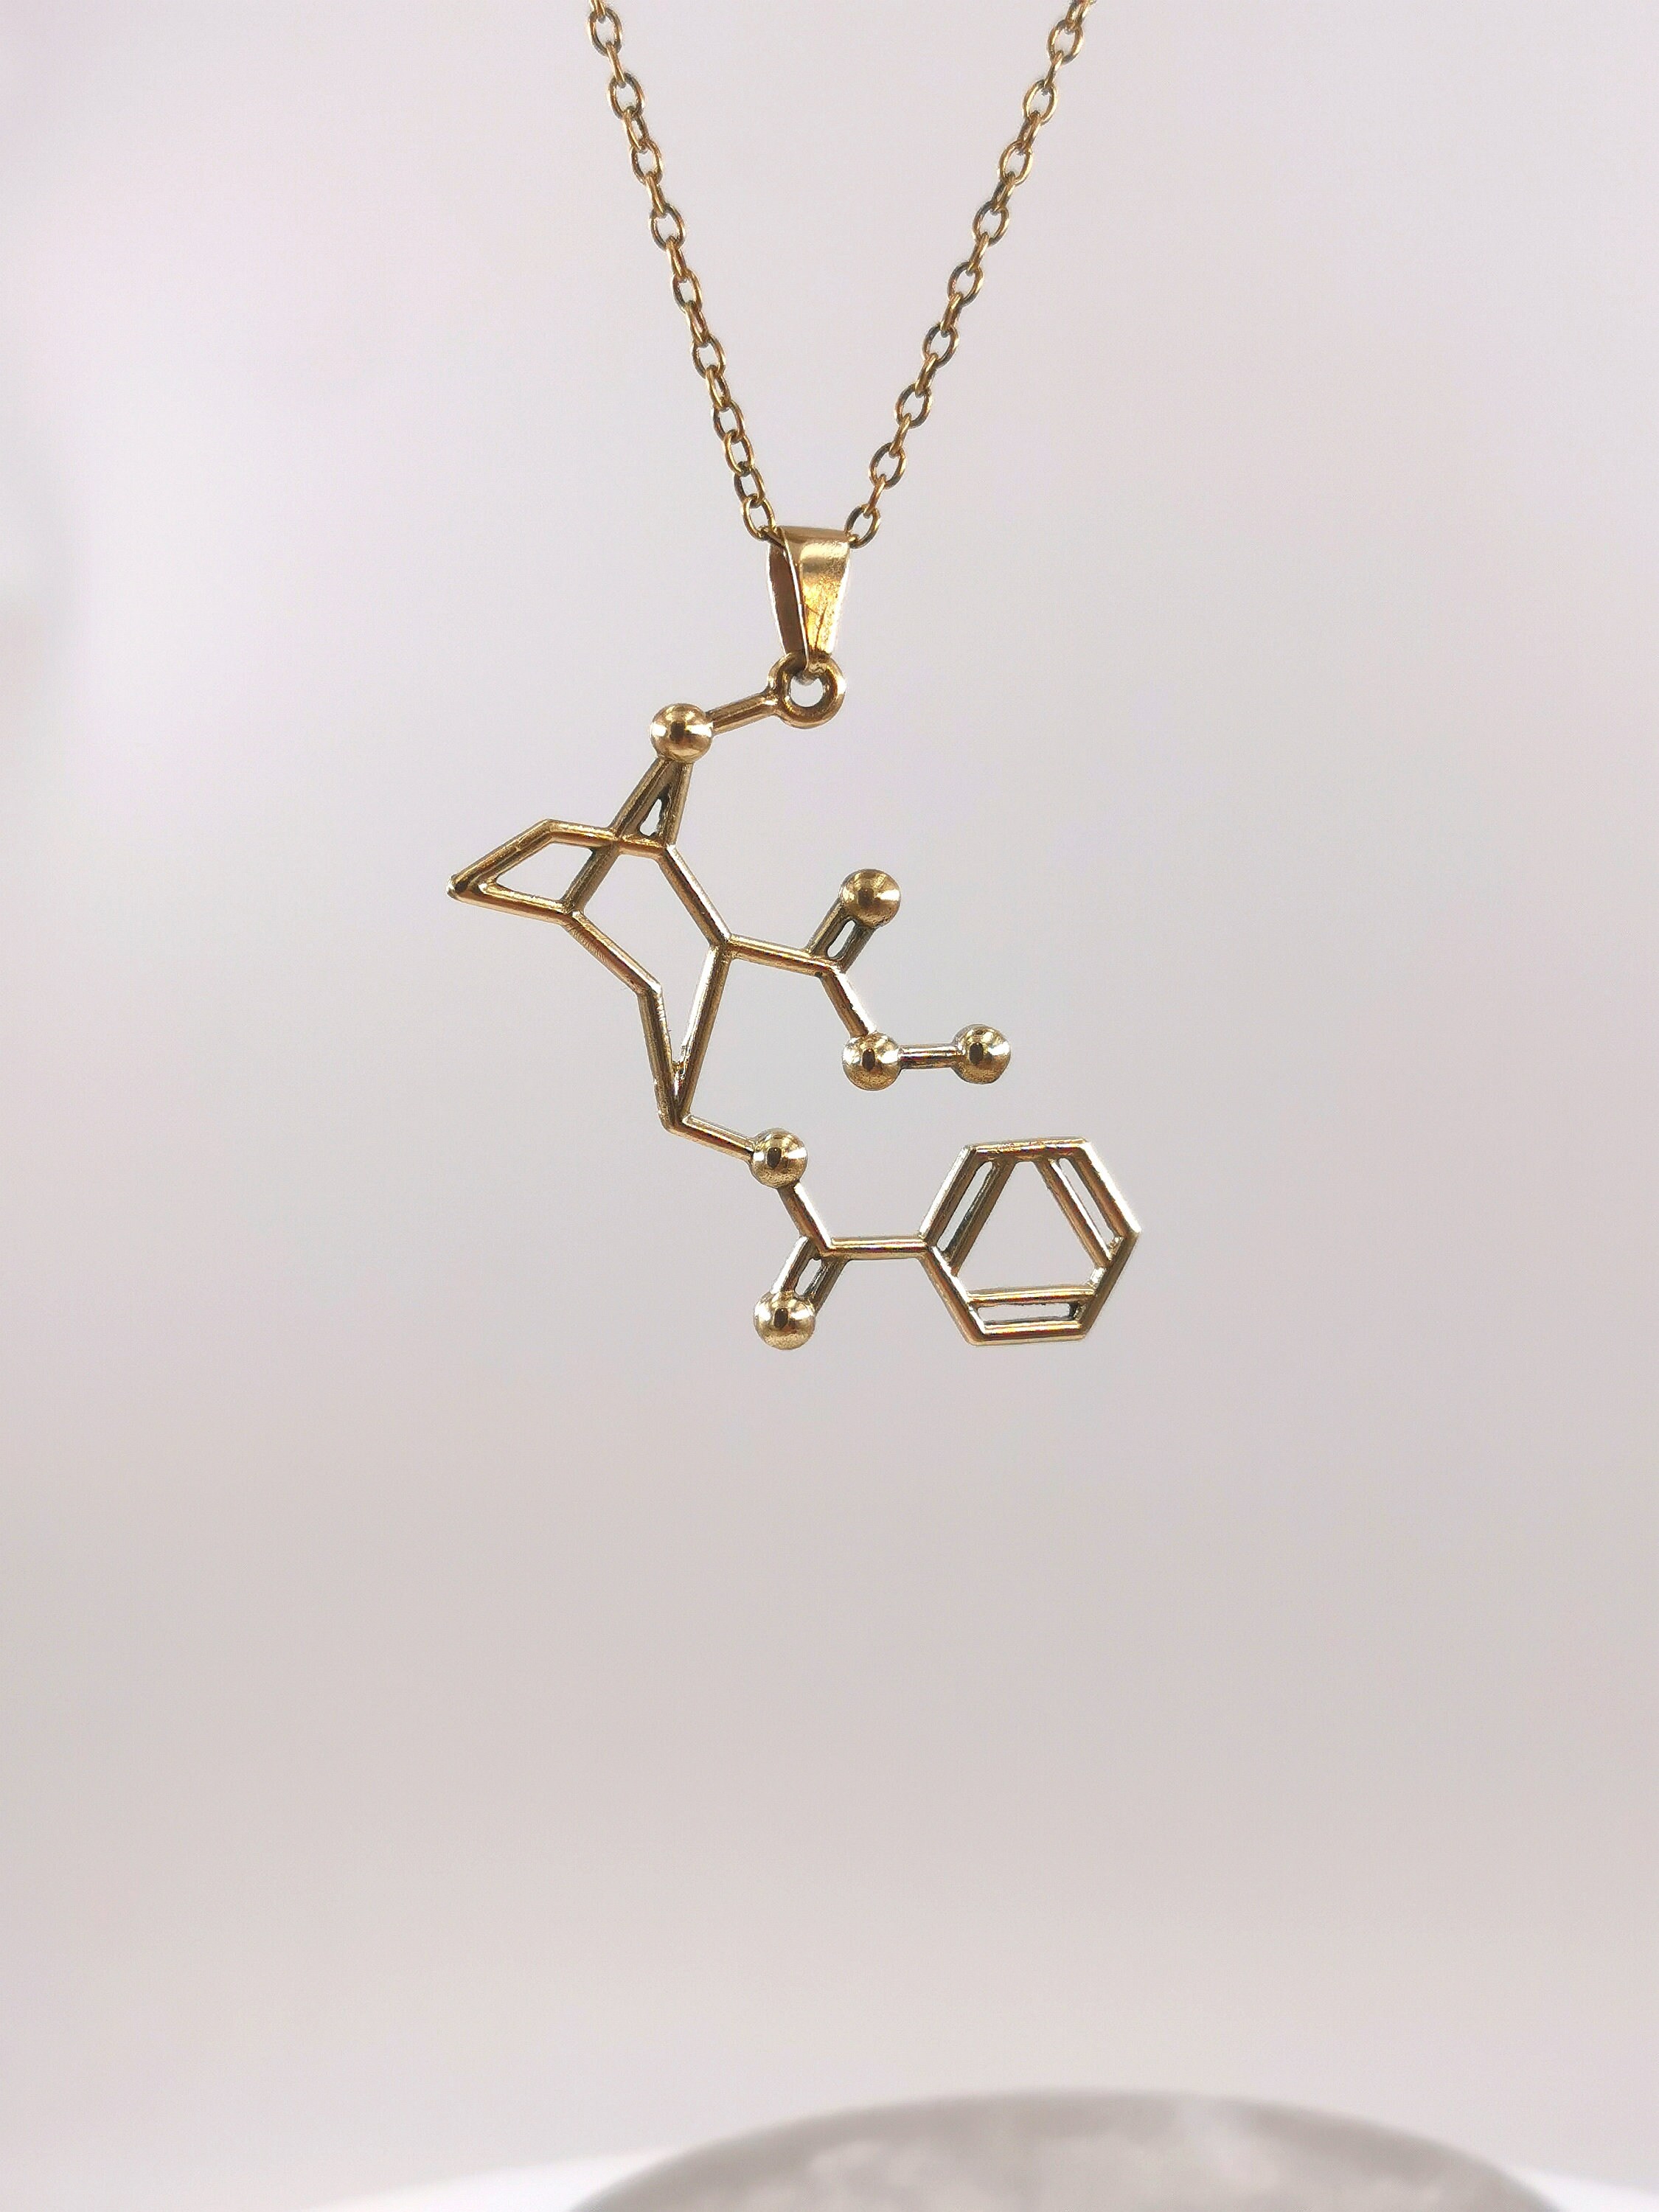 Buy Cocaine Necklace Online In India -  India